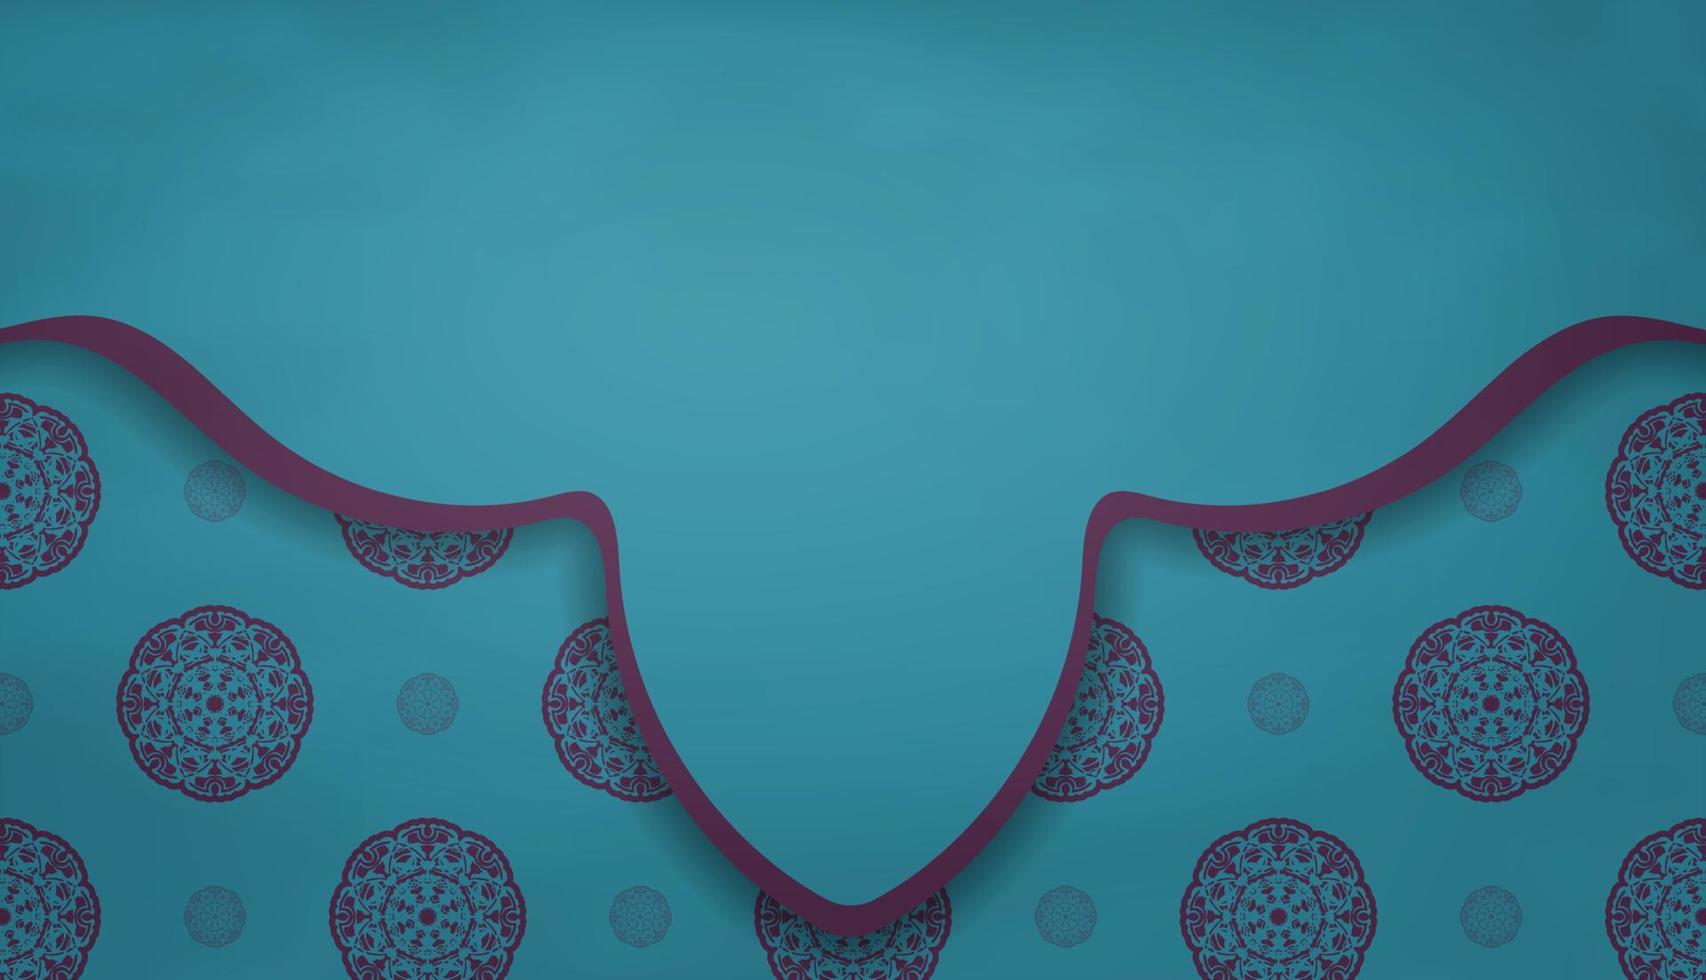 Baner of turquoise color with mandala purple ornament for design under the text vector